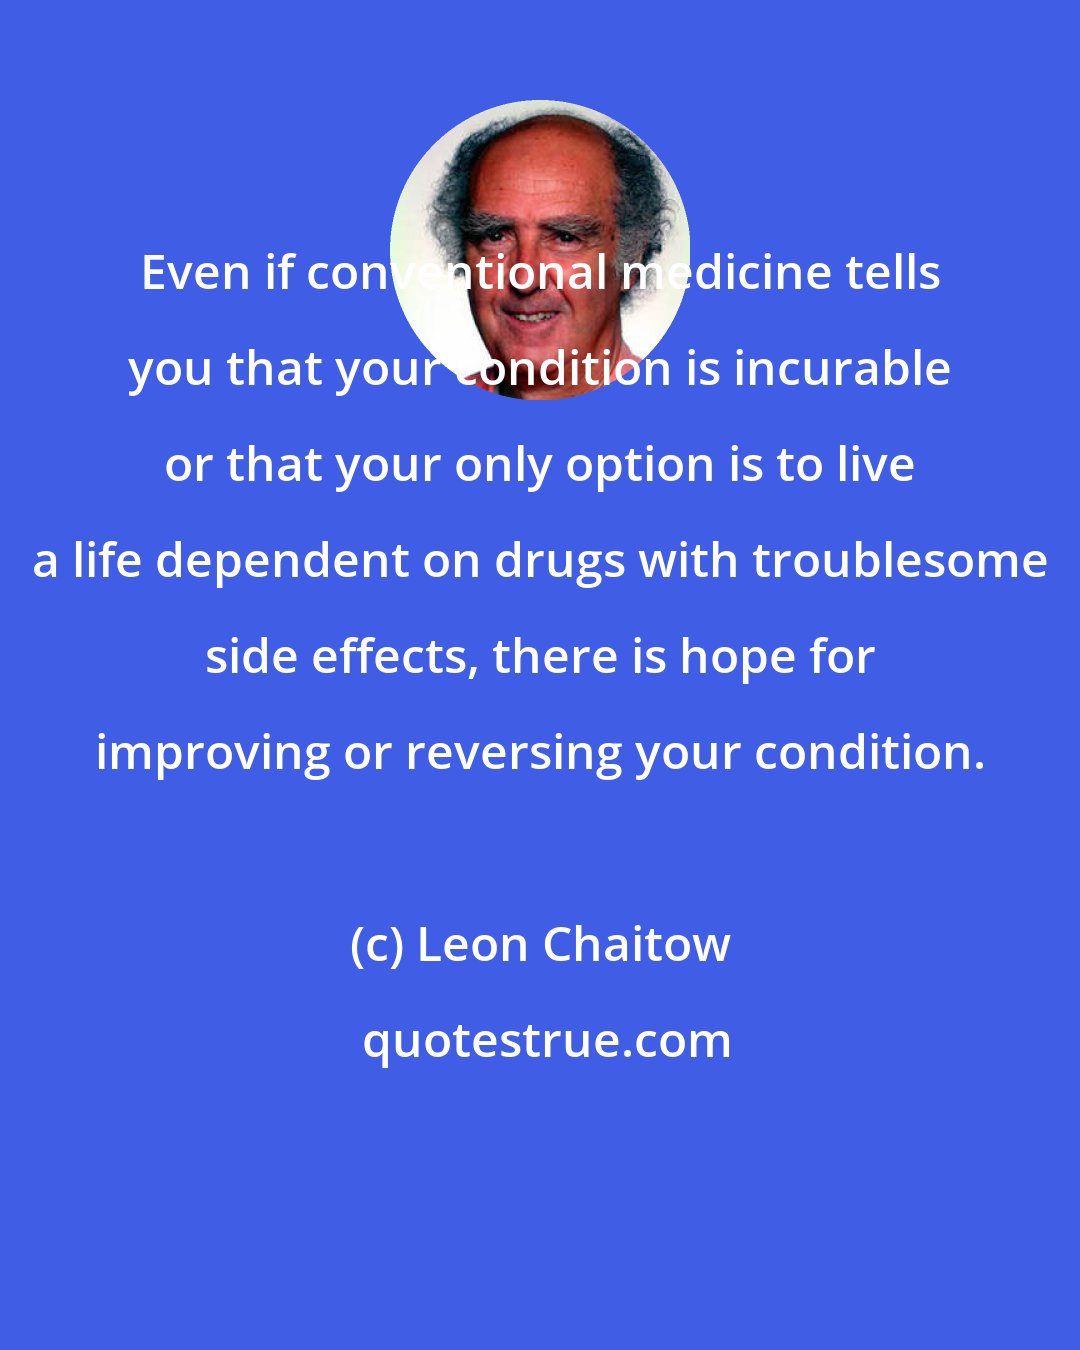 Leon Chaitow: Even if conventional medicine tells you that your condition is incurable or that your only option is to live a life dependent on drugs with troublesome side effects, there is hope for improving or reversing your condition.